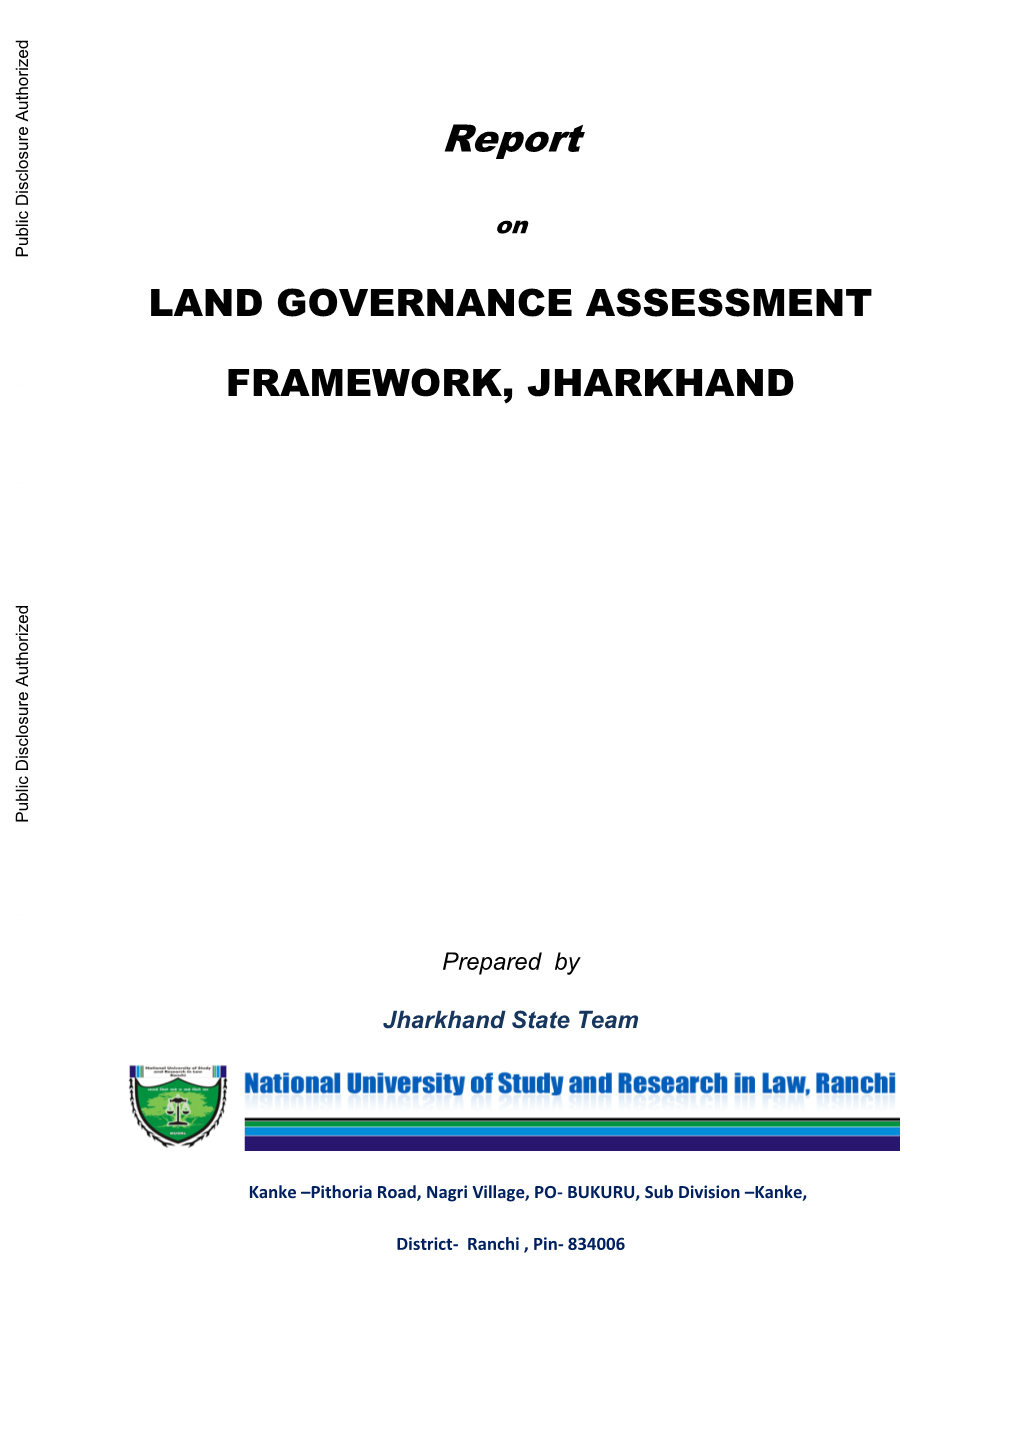 Jharkhand State Team Public Disclosure Authorized